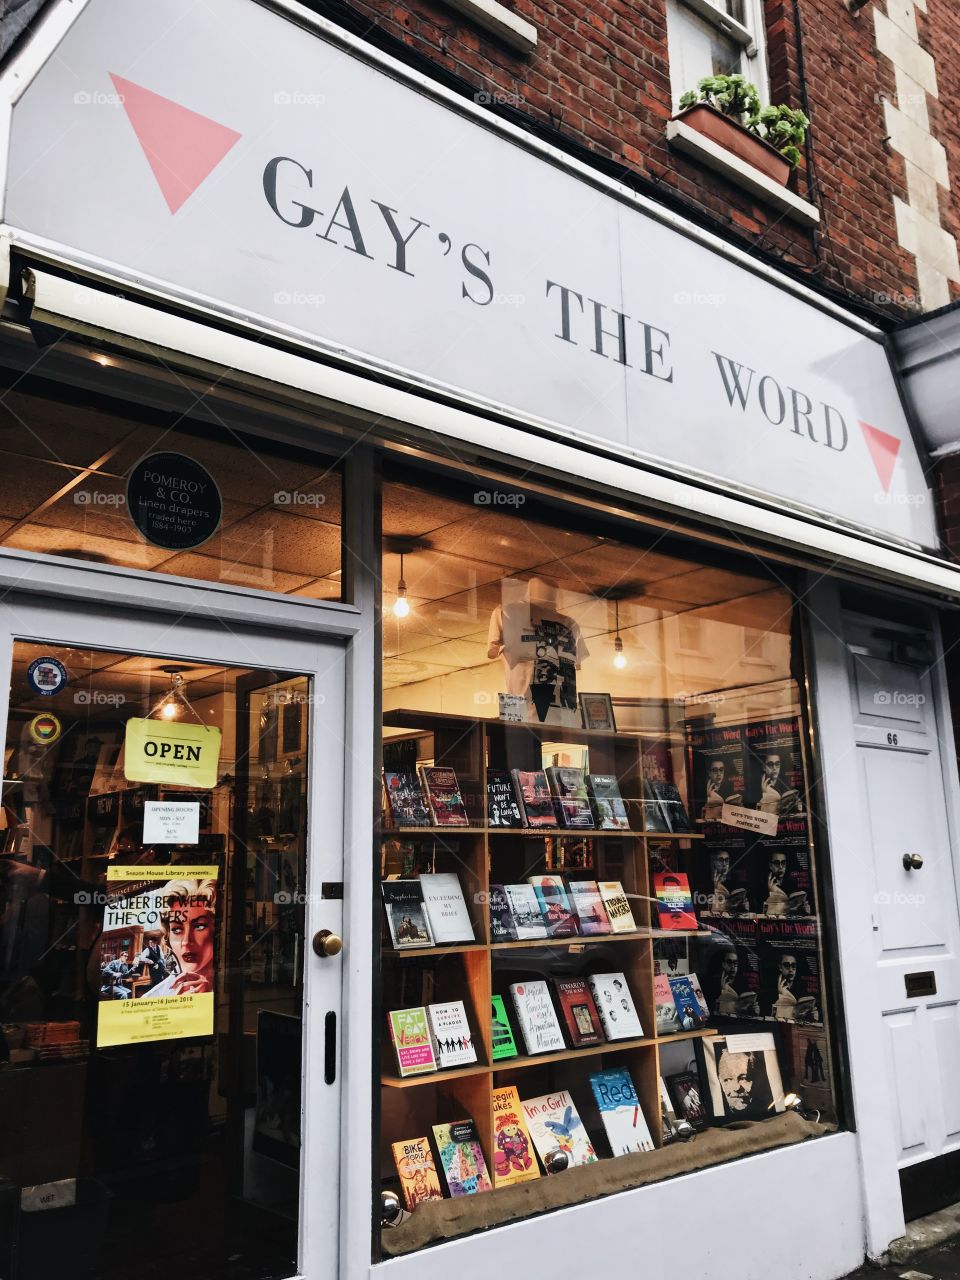 A bookstore, ”Gay’s The World” in London📍